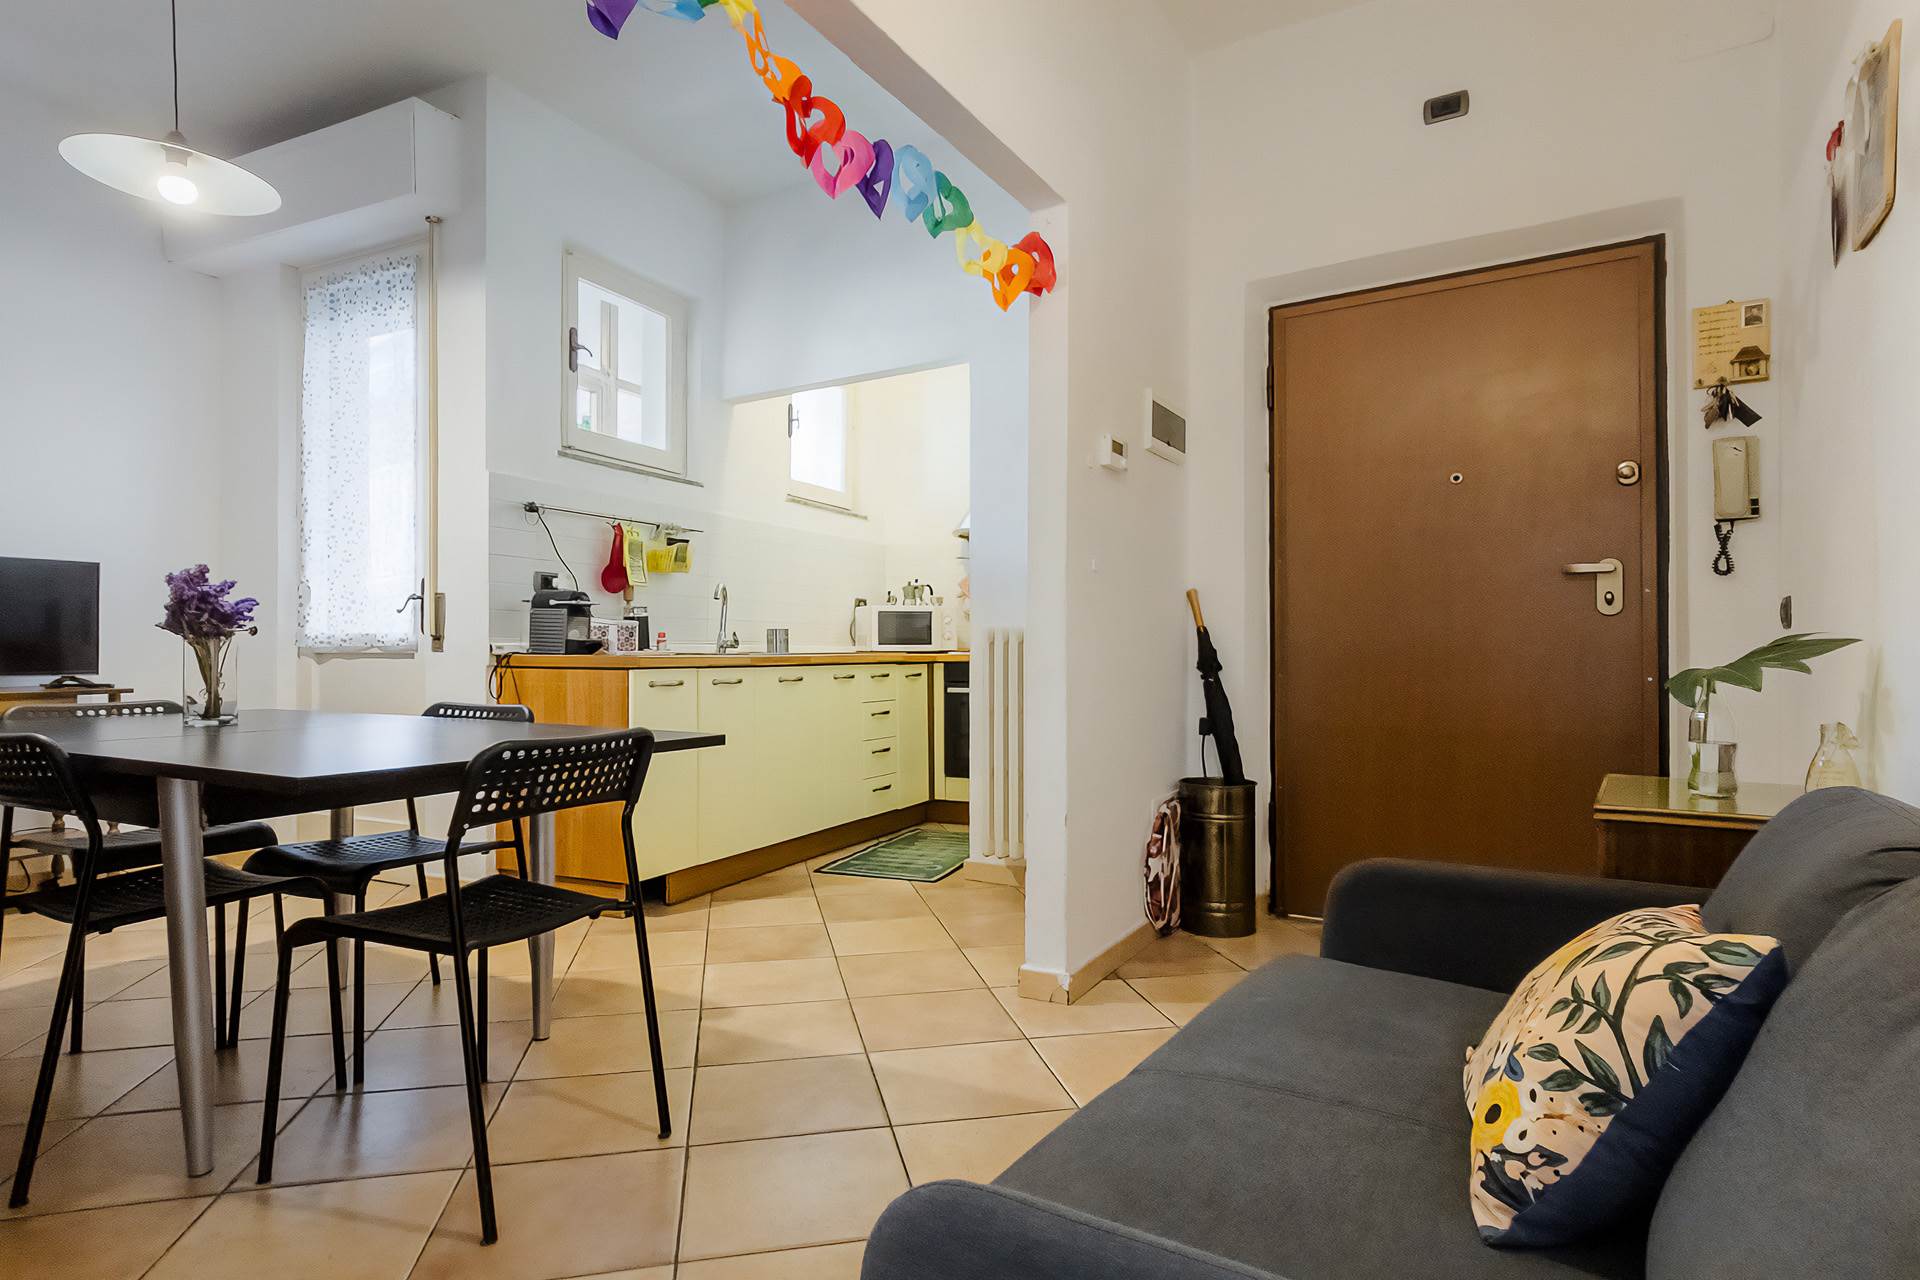 Hidden in a quiet street adjacent to Piazza d'Armi, this charming residence from 1965 offers an oasis of peace in the bustling heart of Siena. On the 